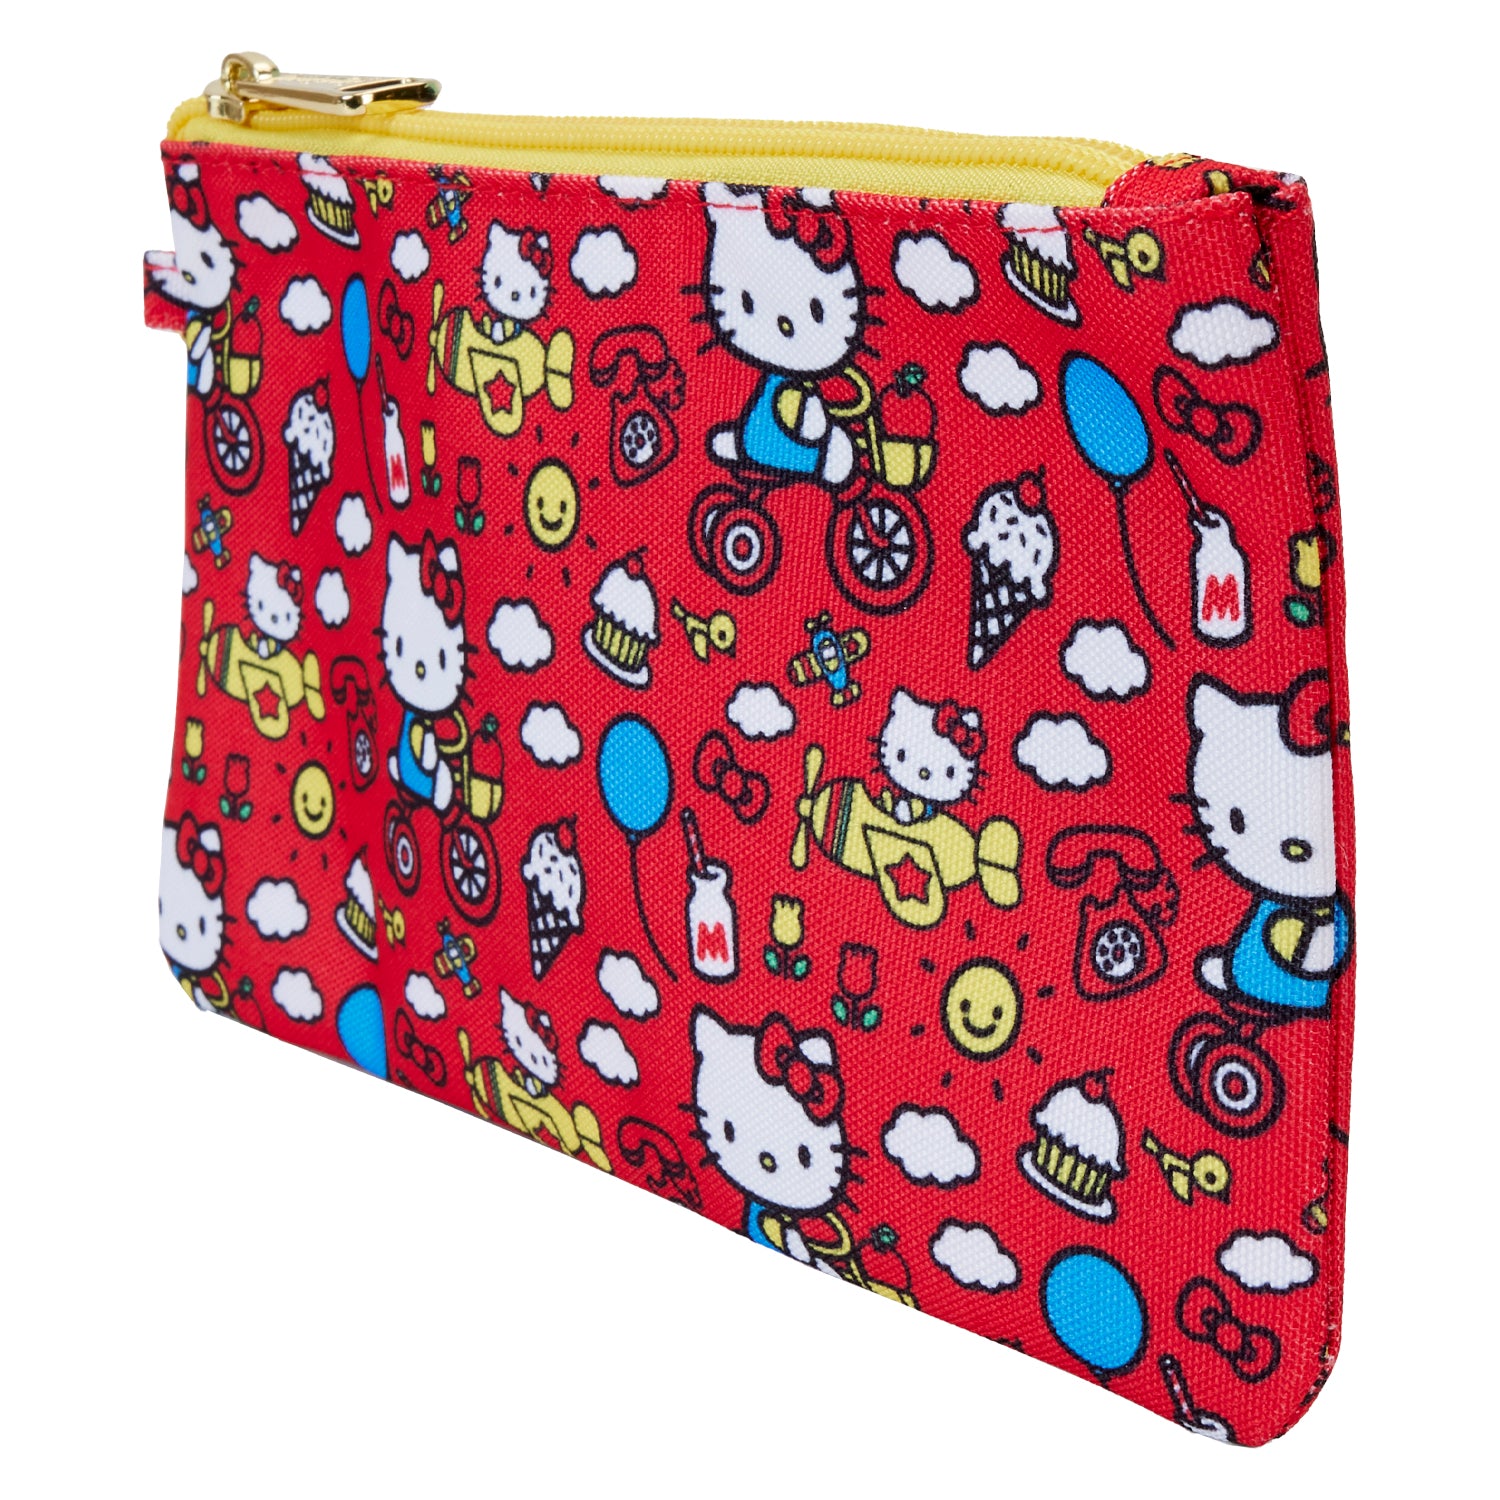 Loungefly x Sanrio Hello Kitty 50th Anniversary Classic AOP Wristlet Wallet